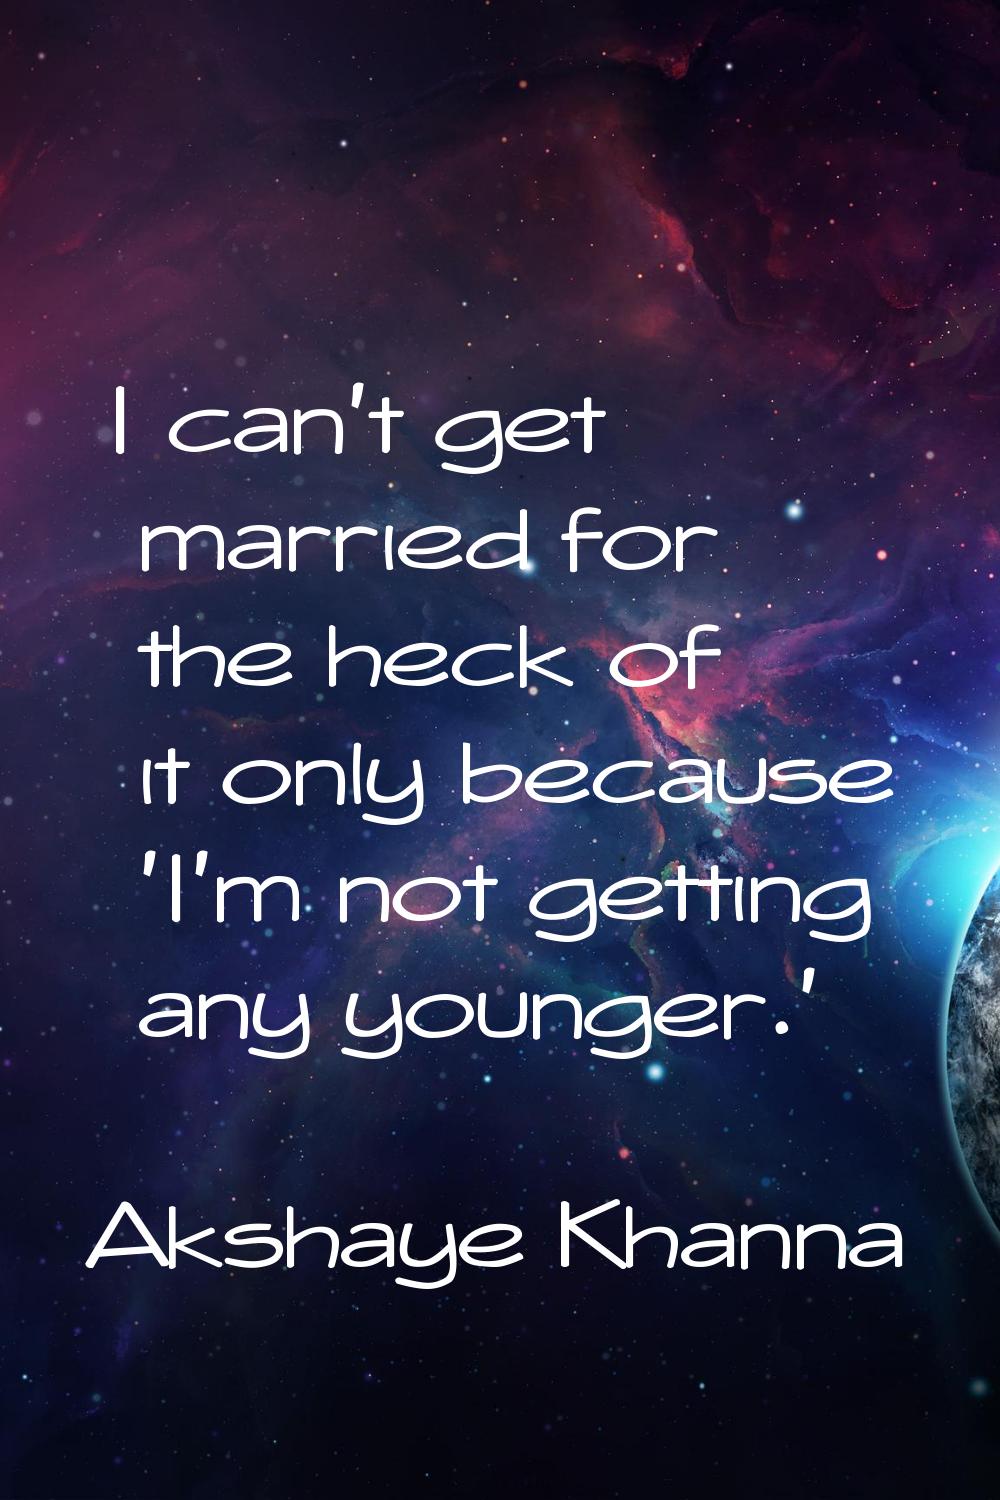 I can't get married for the heck of it only because 'I'm not getting any younger.'